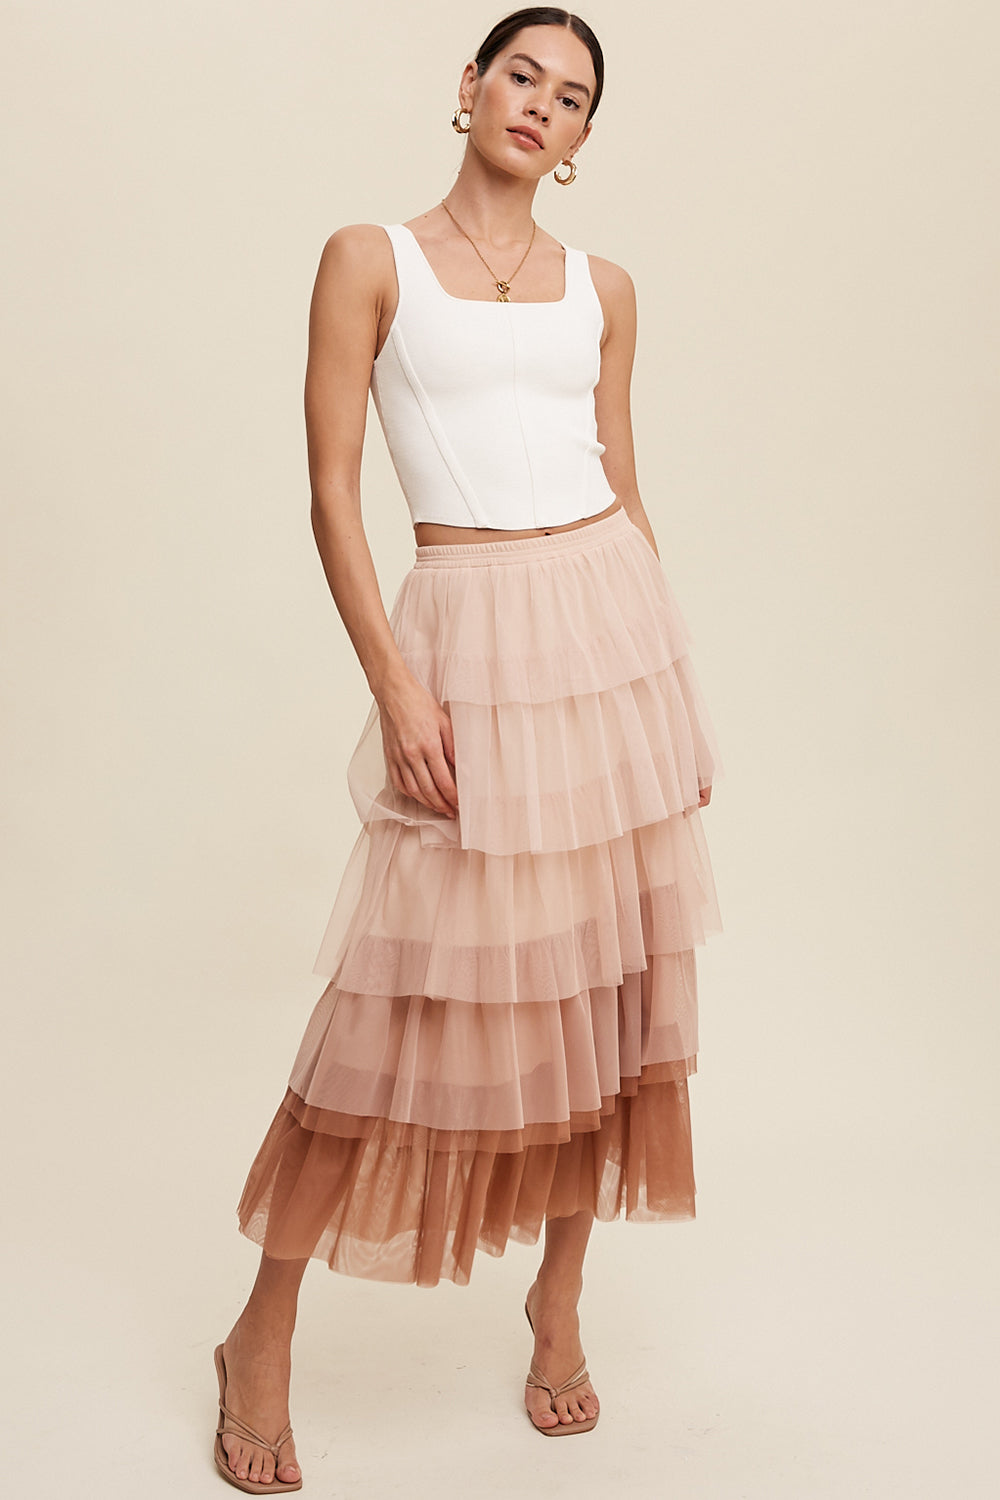 Gradient Ruffle Tiered Skirt - Mocha-Skirt- Hometown Style HTS, women's in store and online boutique located in Ingersoll, Ontario